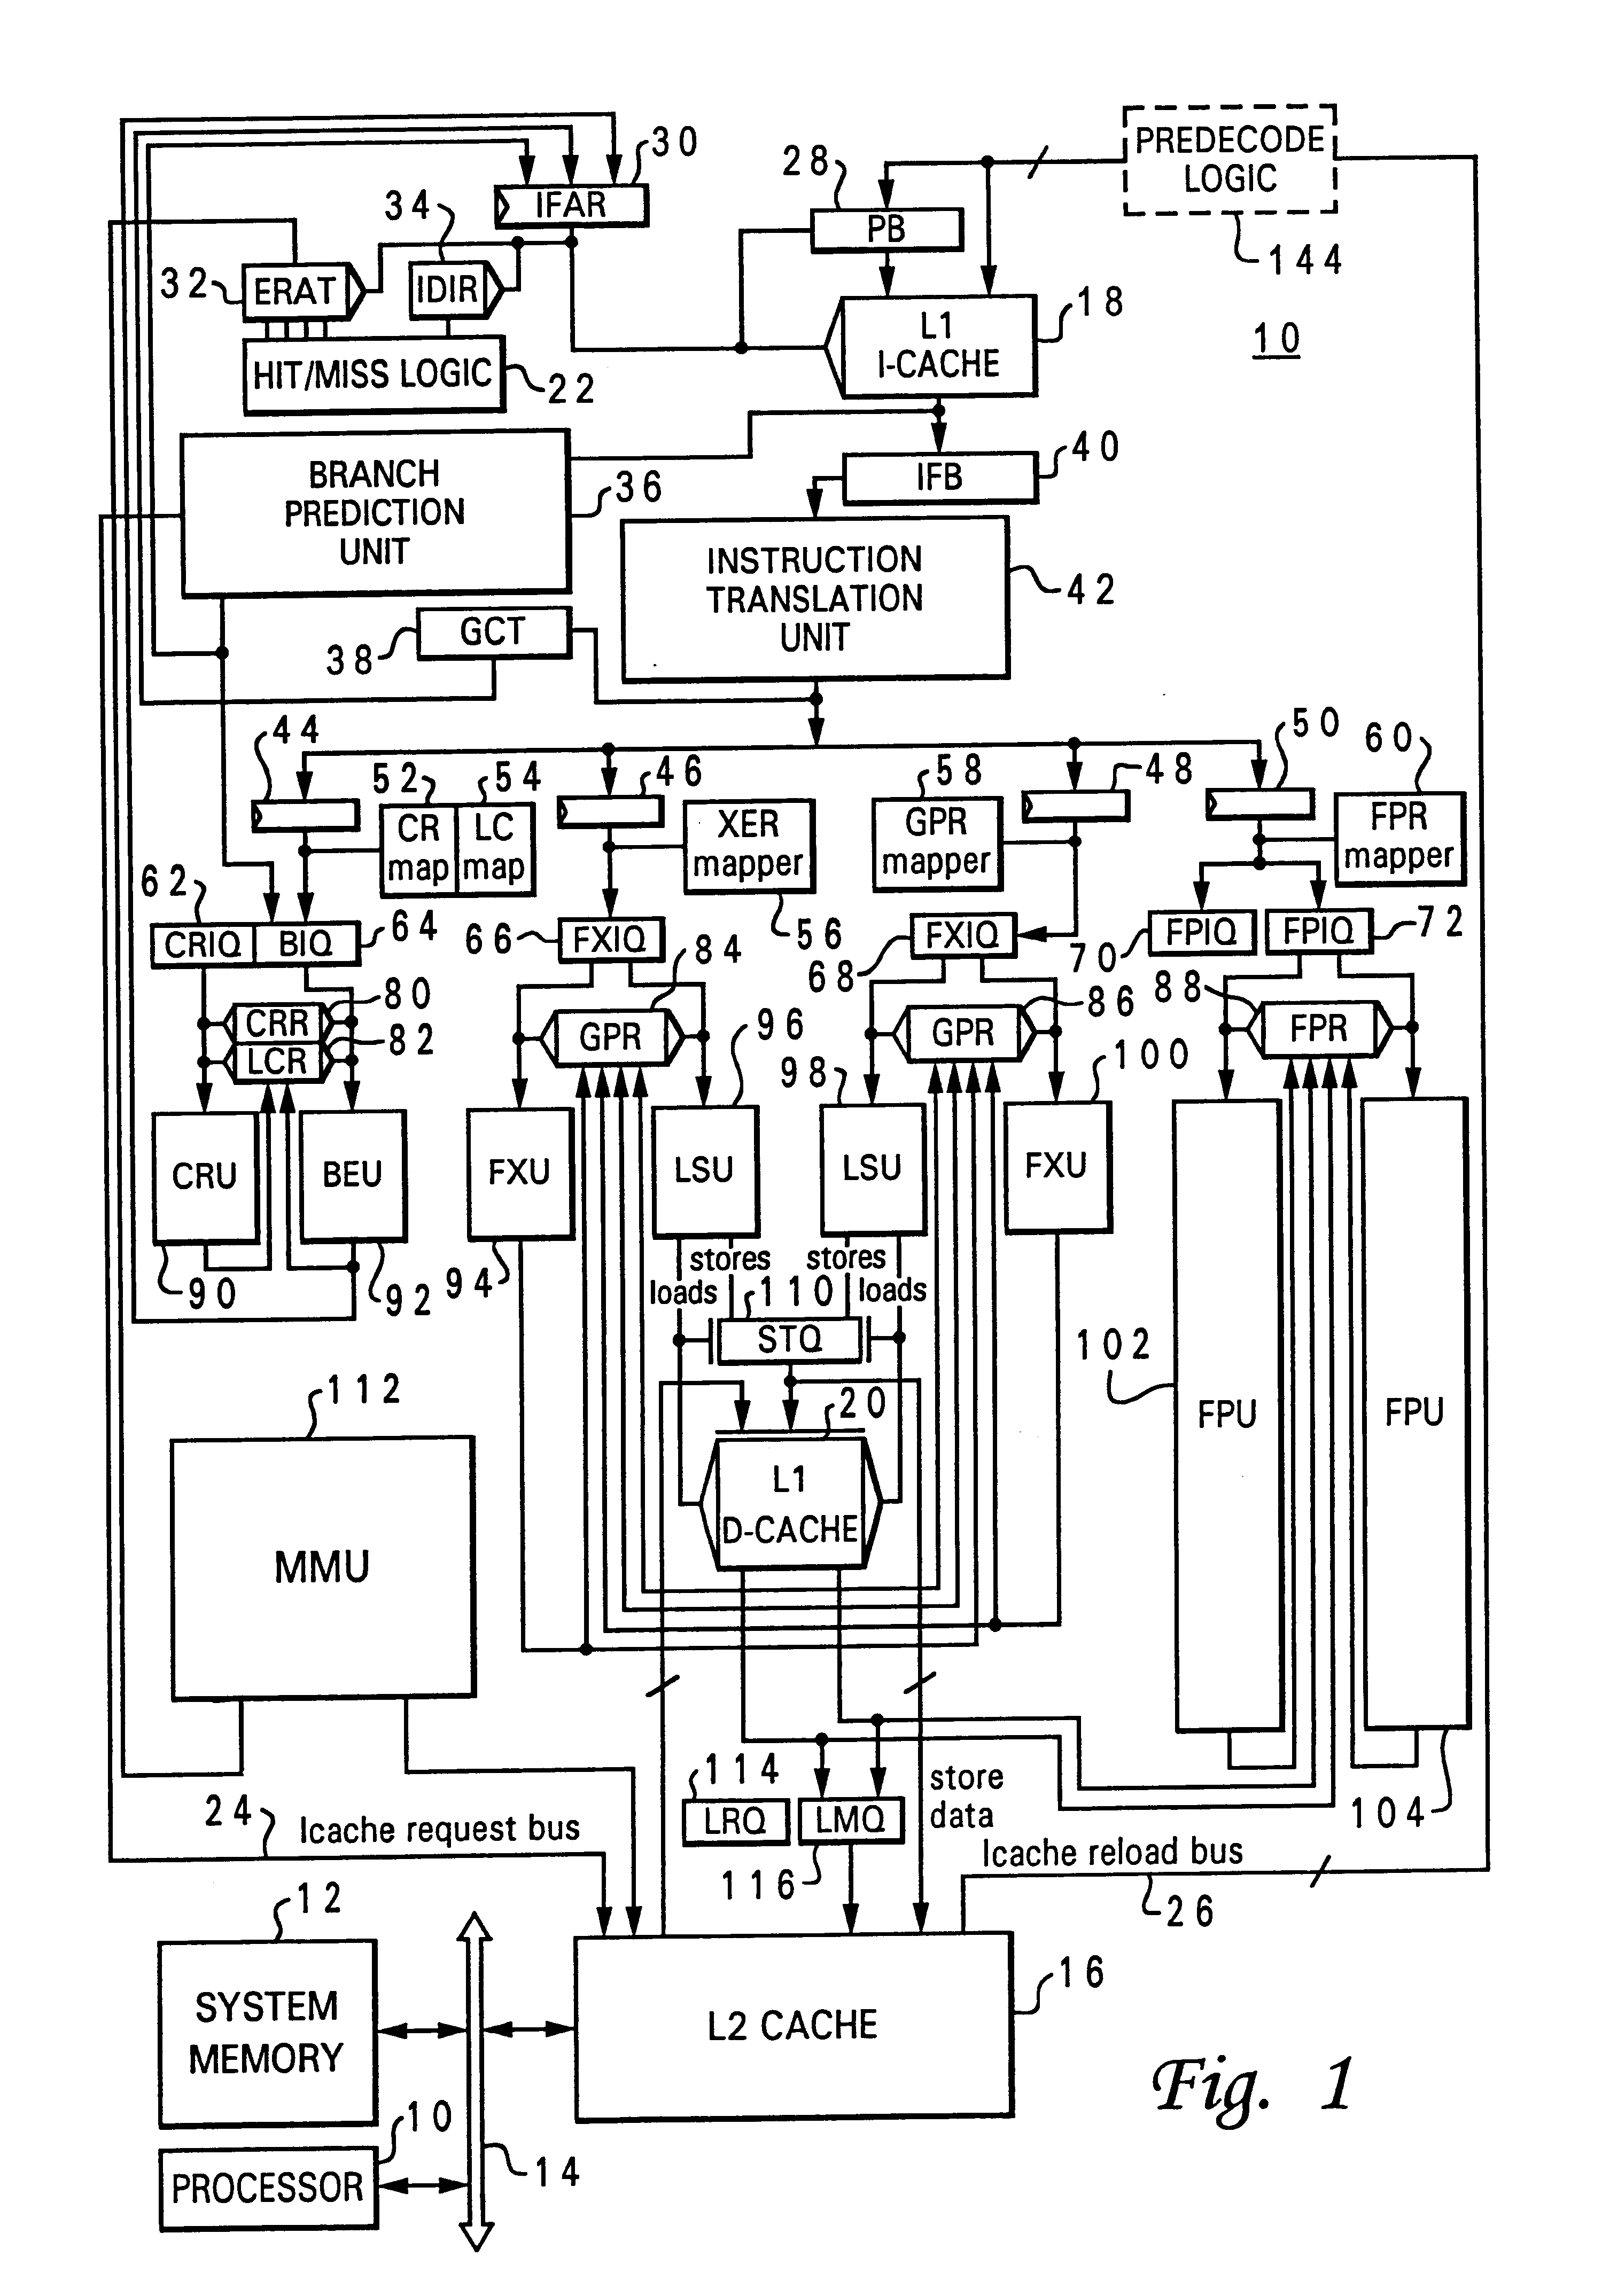 Processor and method that predict condition register-dependent conditional branch instructions utilizing a potentially stale condition register value